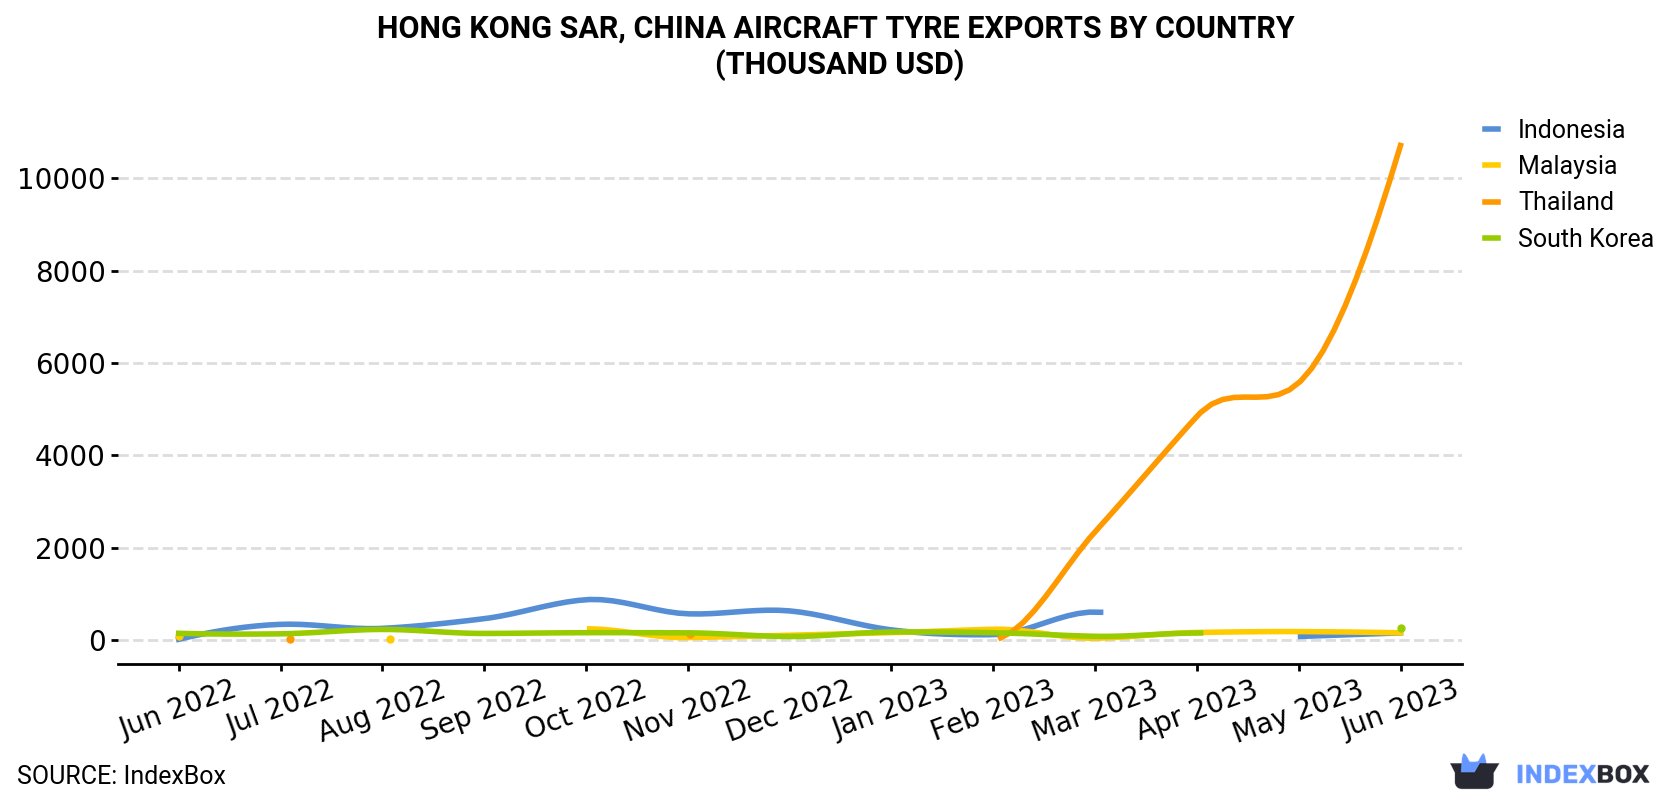 Hong Kong Aircraft Tyre Exports By Country (Thousand USD)